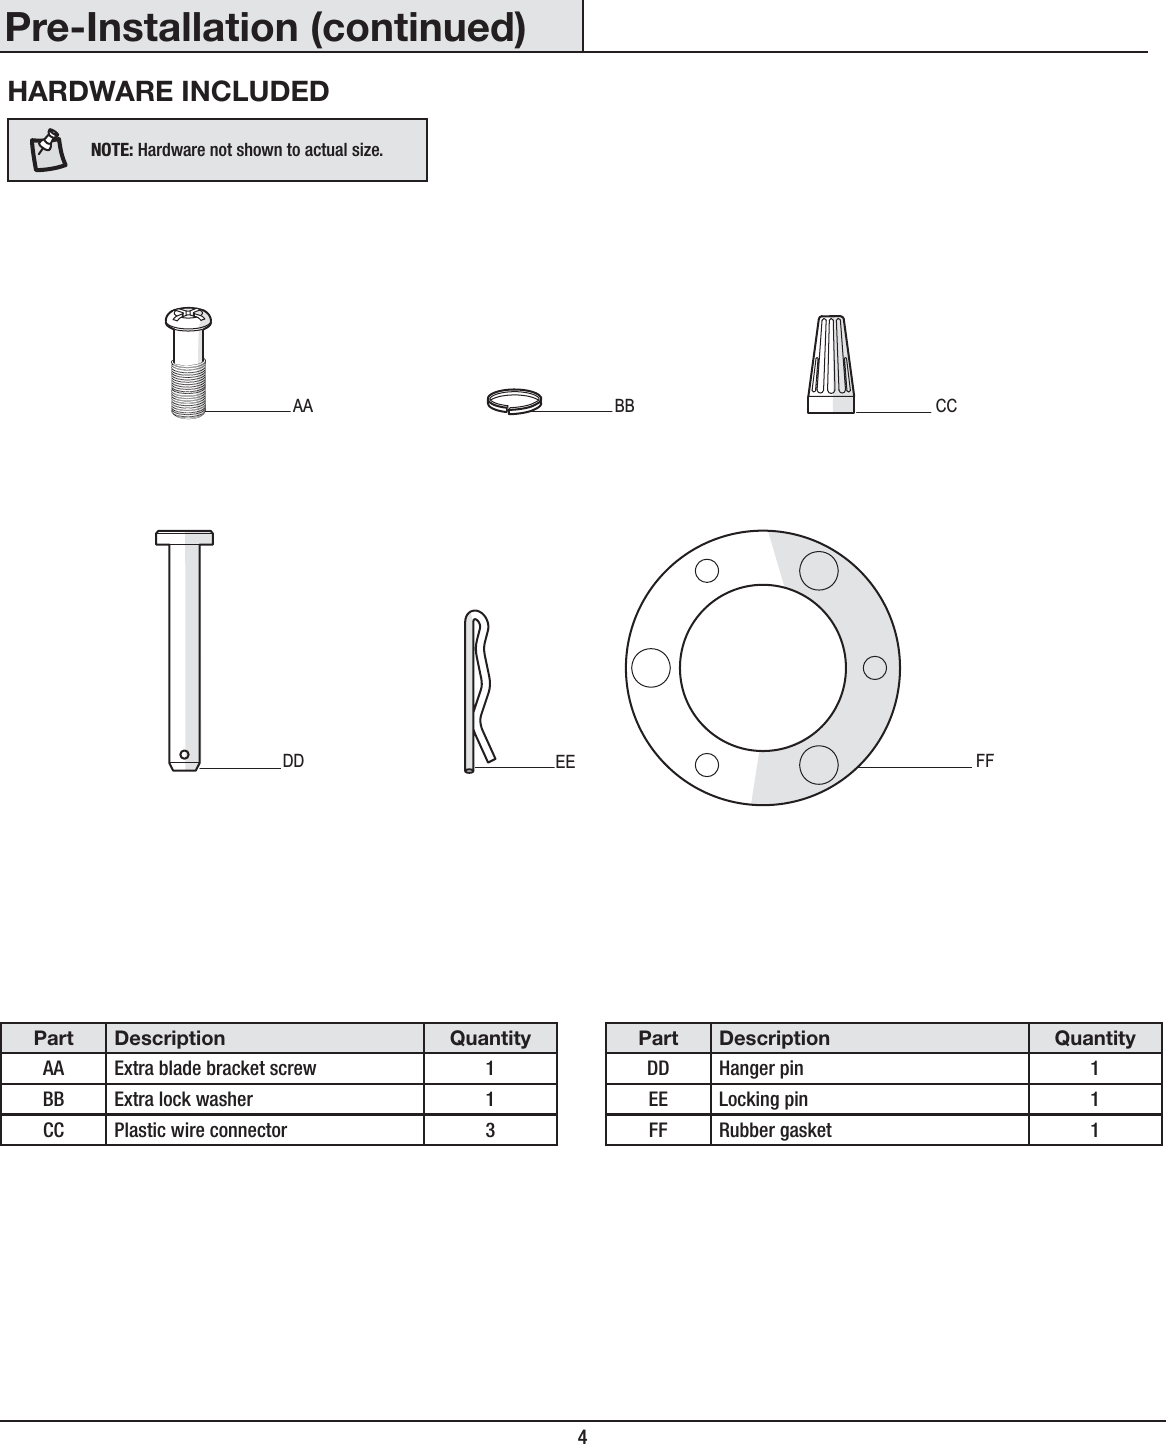 4Part Description QuantityAA Extra blade bracket screw 1BB Extra lock washer 1CC Plastic wire connector 3Part Description QuantityDD Hanger pin 1EE Locking pin 1FF Rubber gasket 1Pre-Installation (continued)HARDWARE INCLUDEDNOTE: Hardware not shown to actual size.CCDD EEAAFFBB